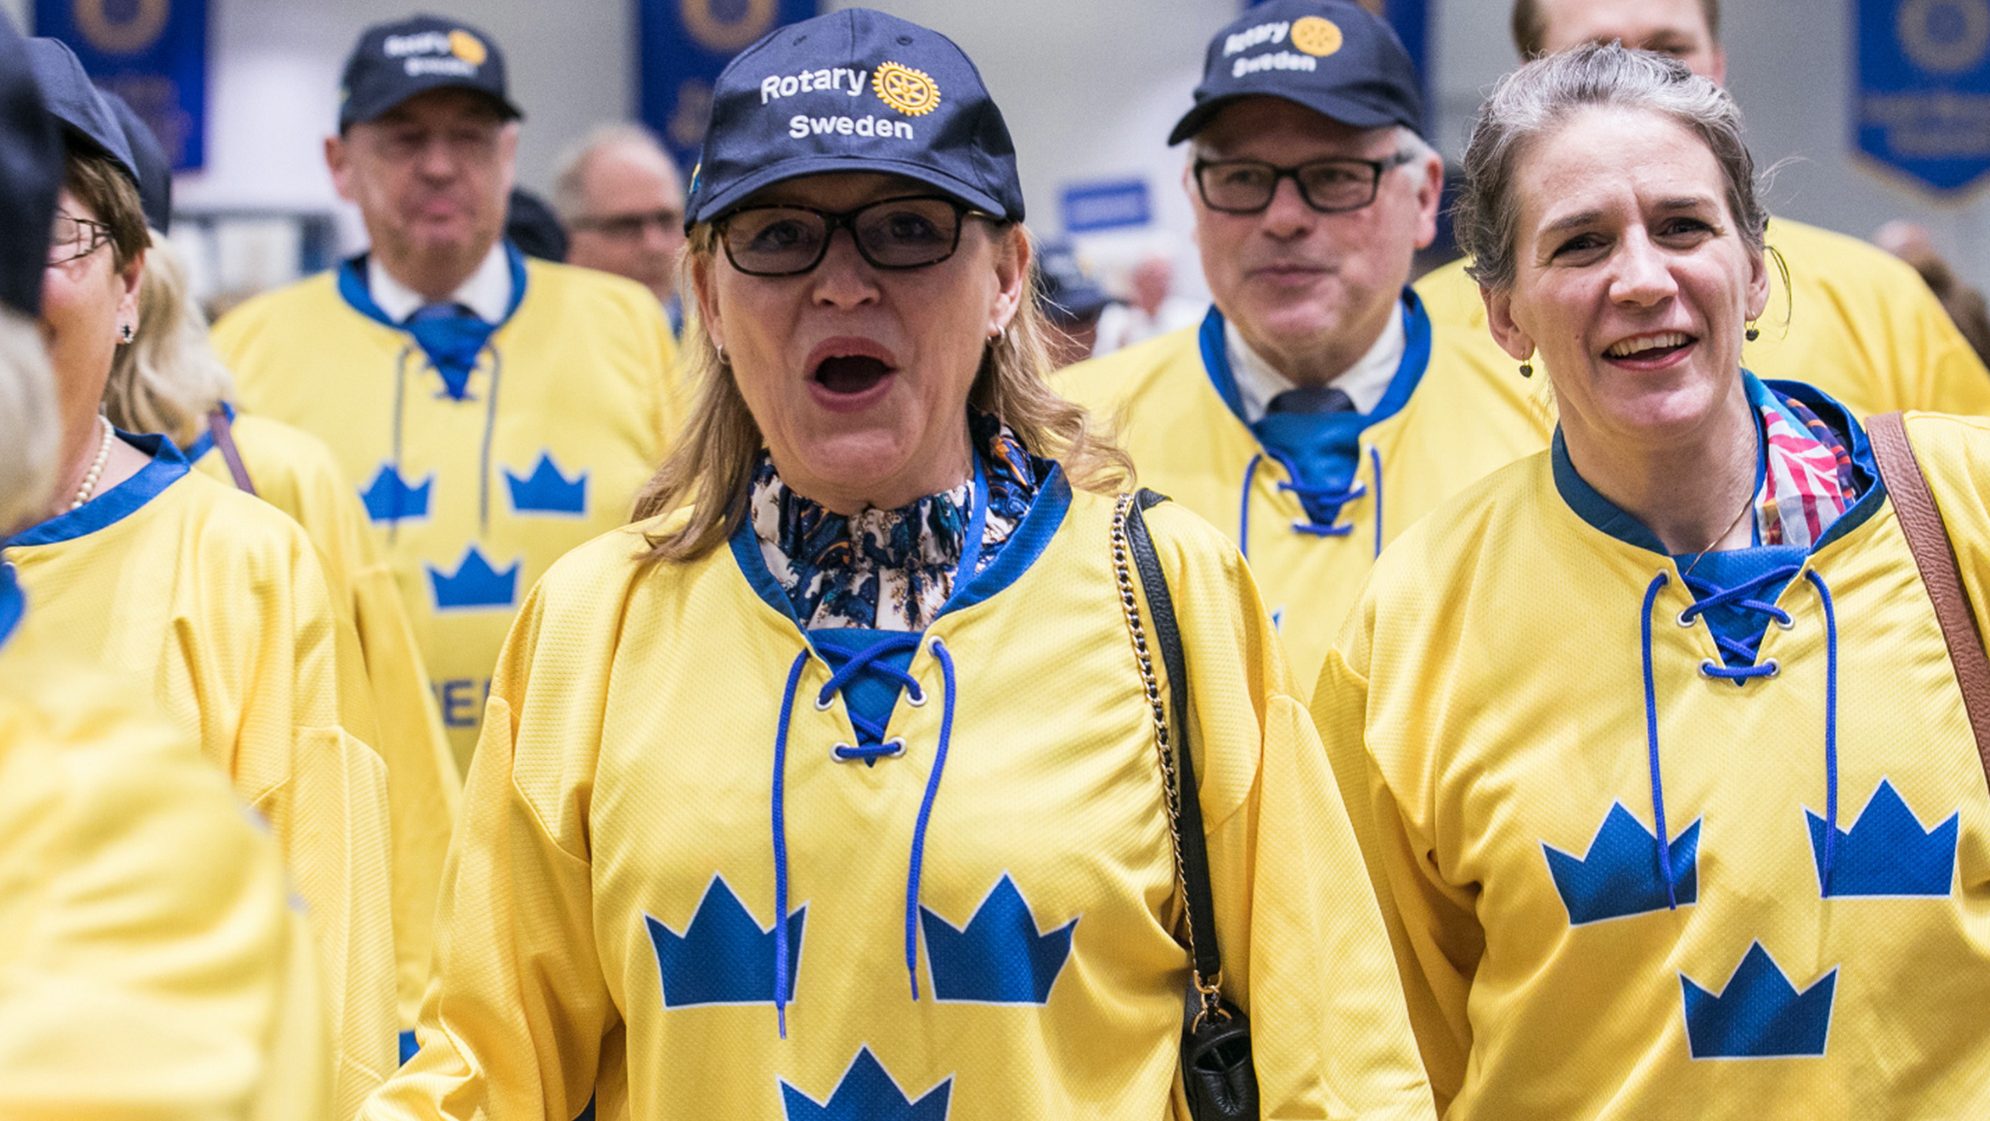 Crowd wearing yellow shirts and blue hats with Rotary Sweden logo.